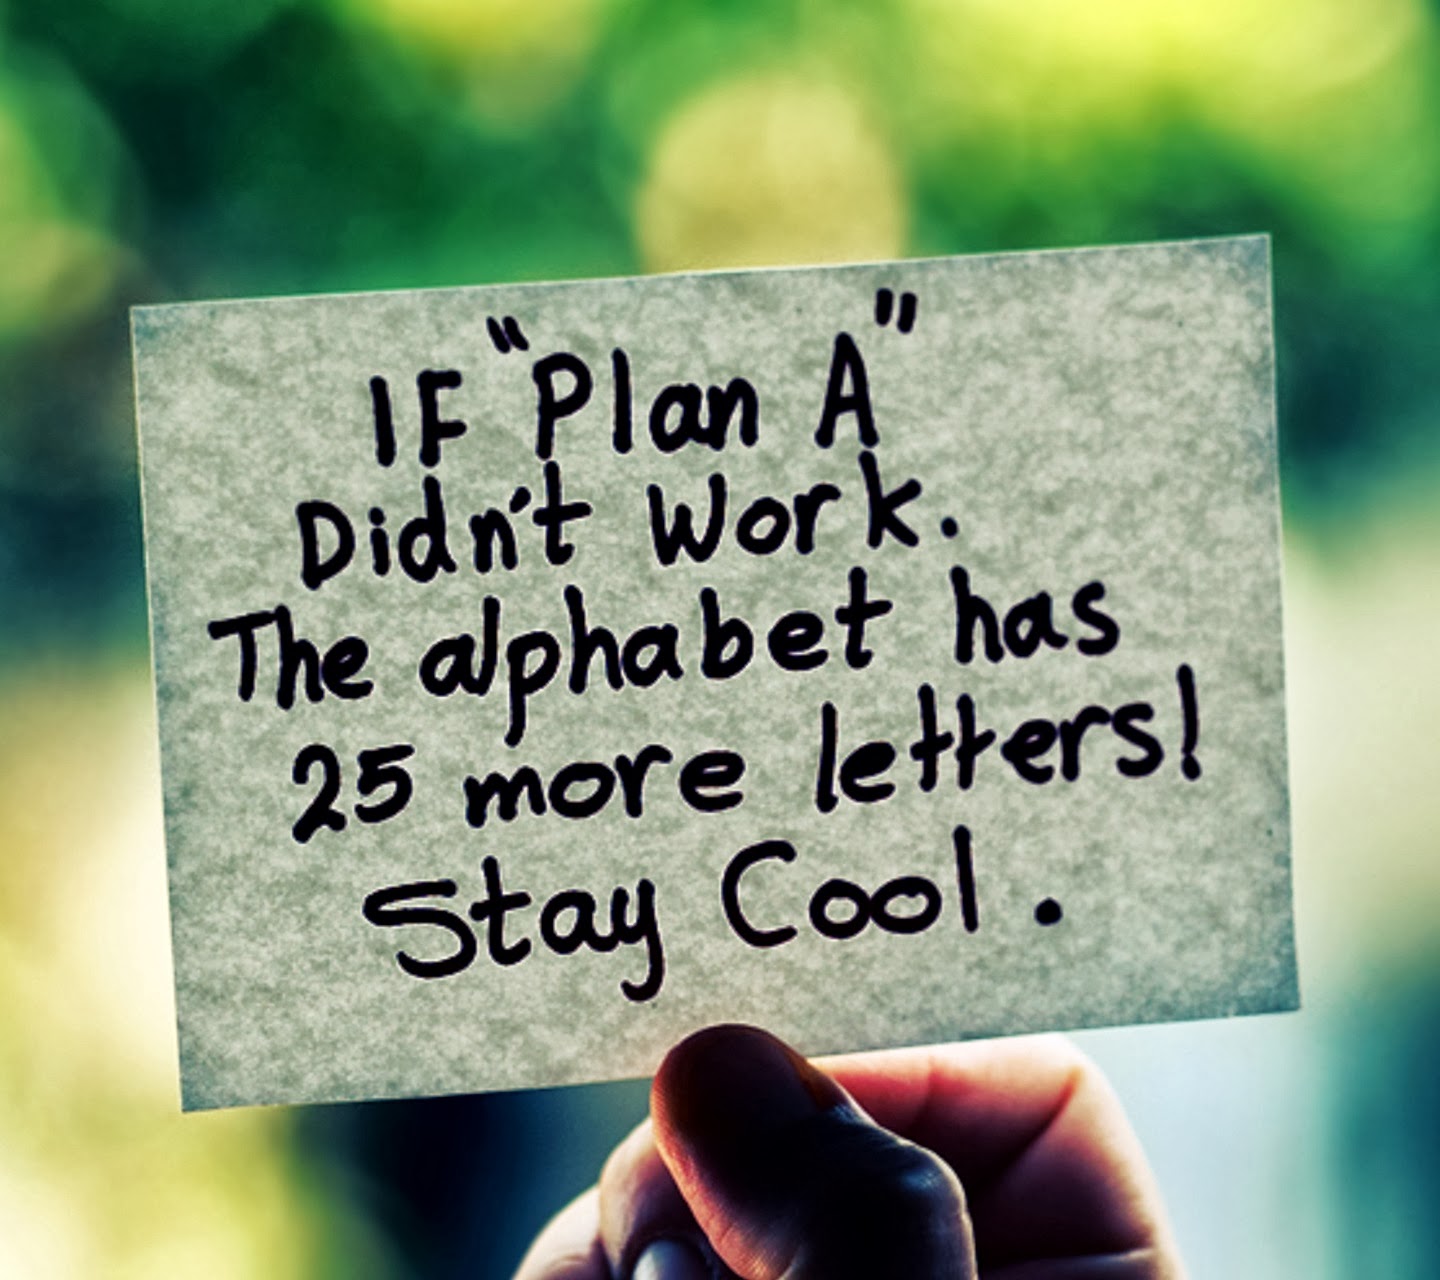 If "Plan A" didn't work. The alphabet has 25 more letters! Stay cool.